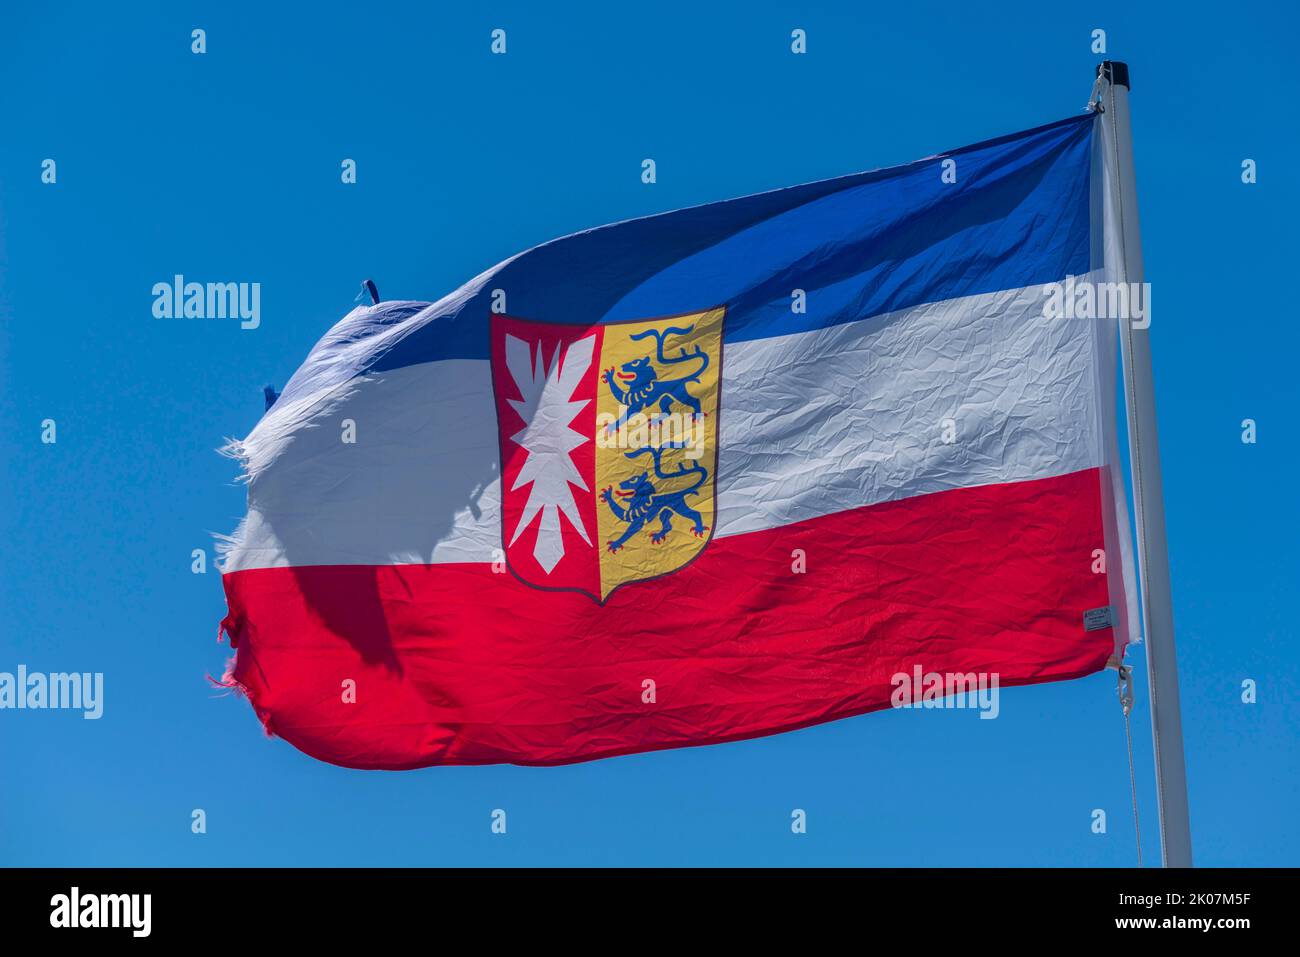 Flag with arms, blue white red, two Schleswigian lions, Holstein nettle leaf, stripes, torn, blue background, Schleswig-Holstein, Germany Stock Photo